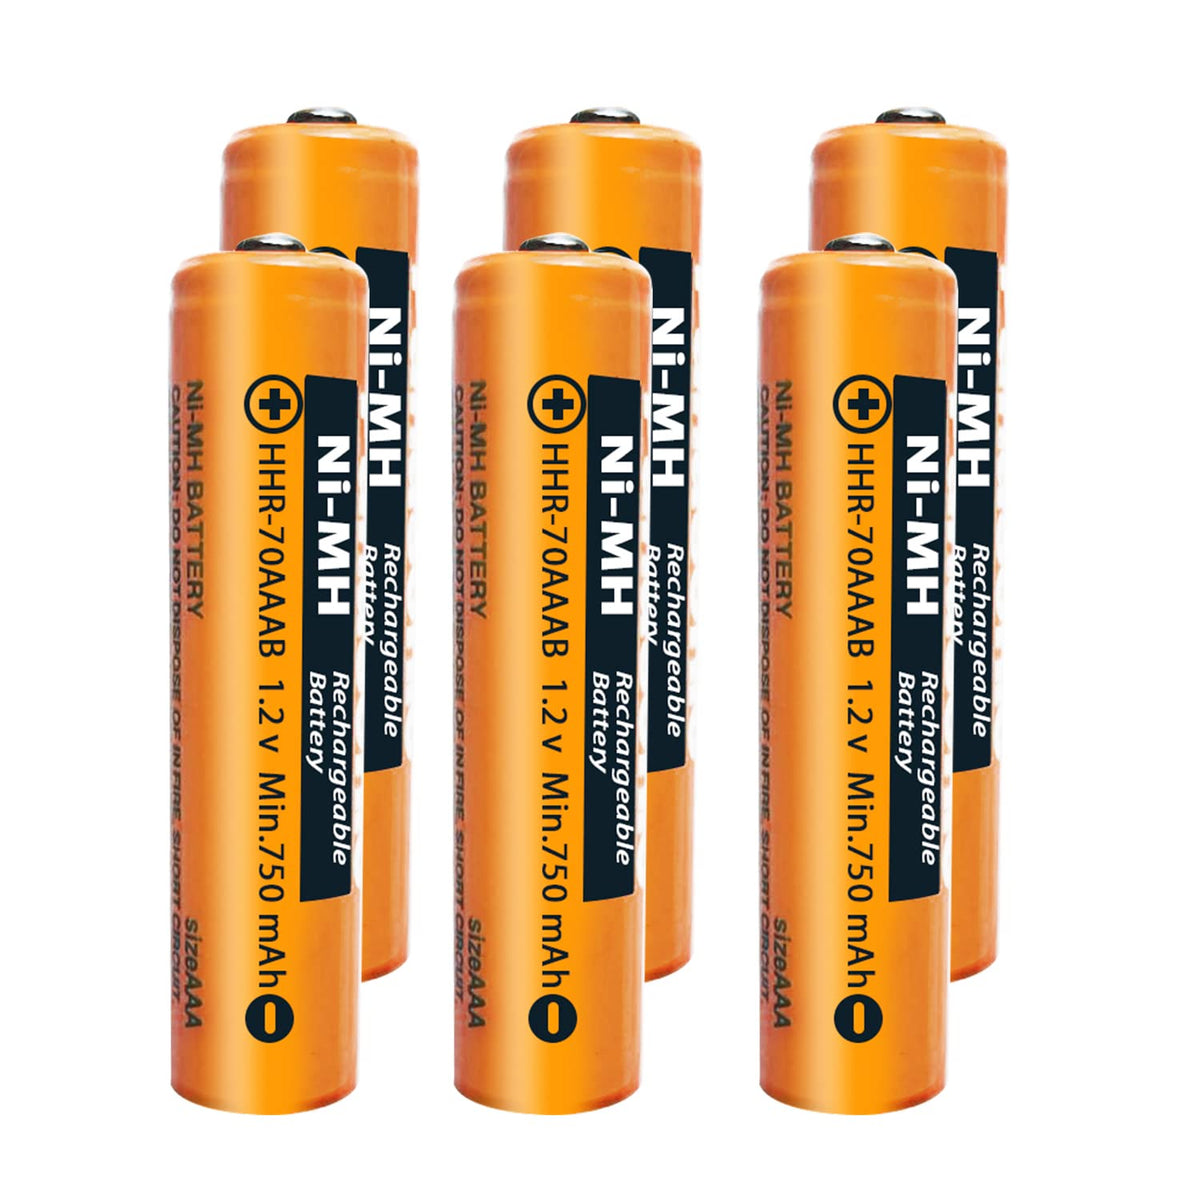 NI-MH AAA 750mAh (1.2 V) Battery for Gigaset Cordless Phones, Rechargeable Batteries AAA for Panosonic - Pack of 6